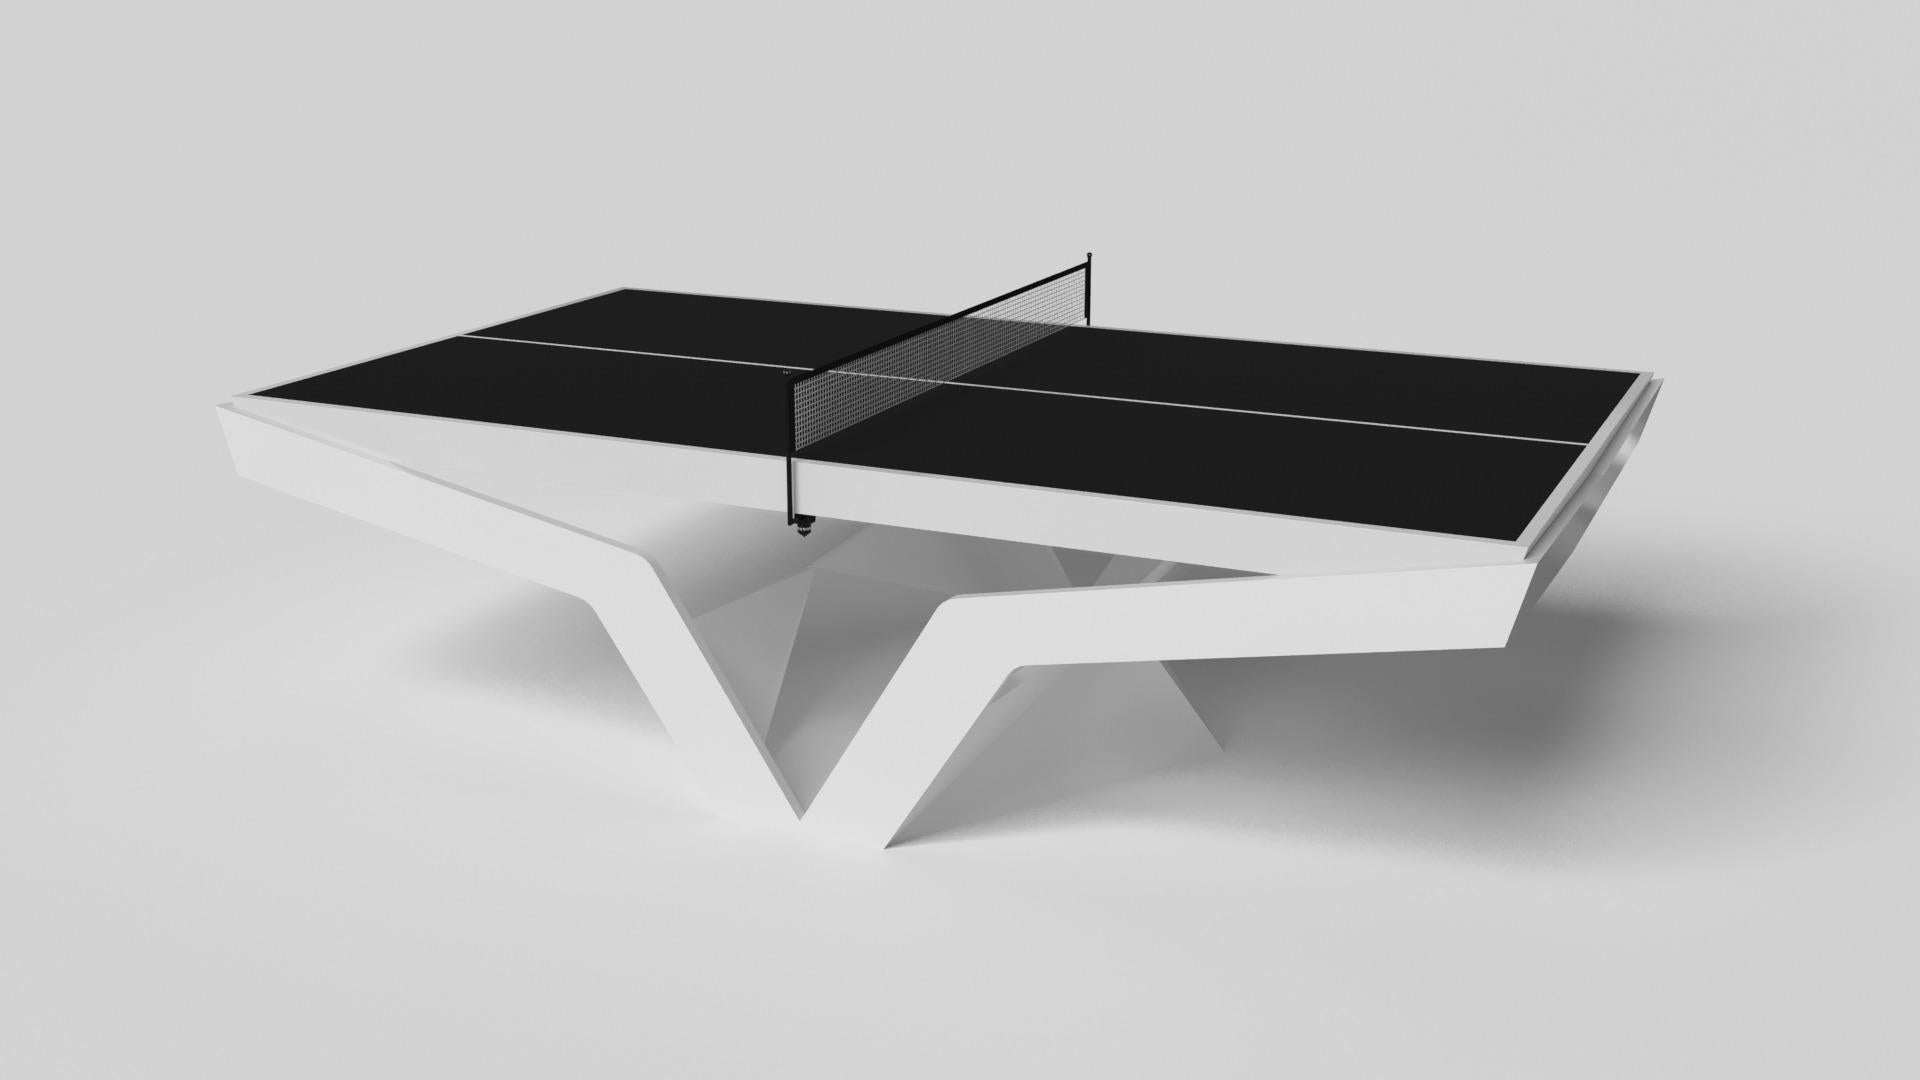 The Enzo table tennis table is Inspired by the aerodynamic angles of top-of-the-line European vehicles. Designed with sleek, V-shaped lines and a thoughtful use of negative space, this table boasts an energetic sense of spirit while epitomizing the